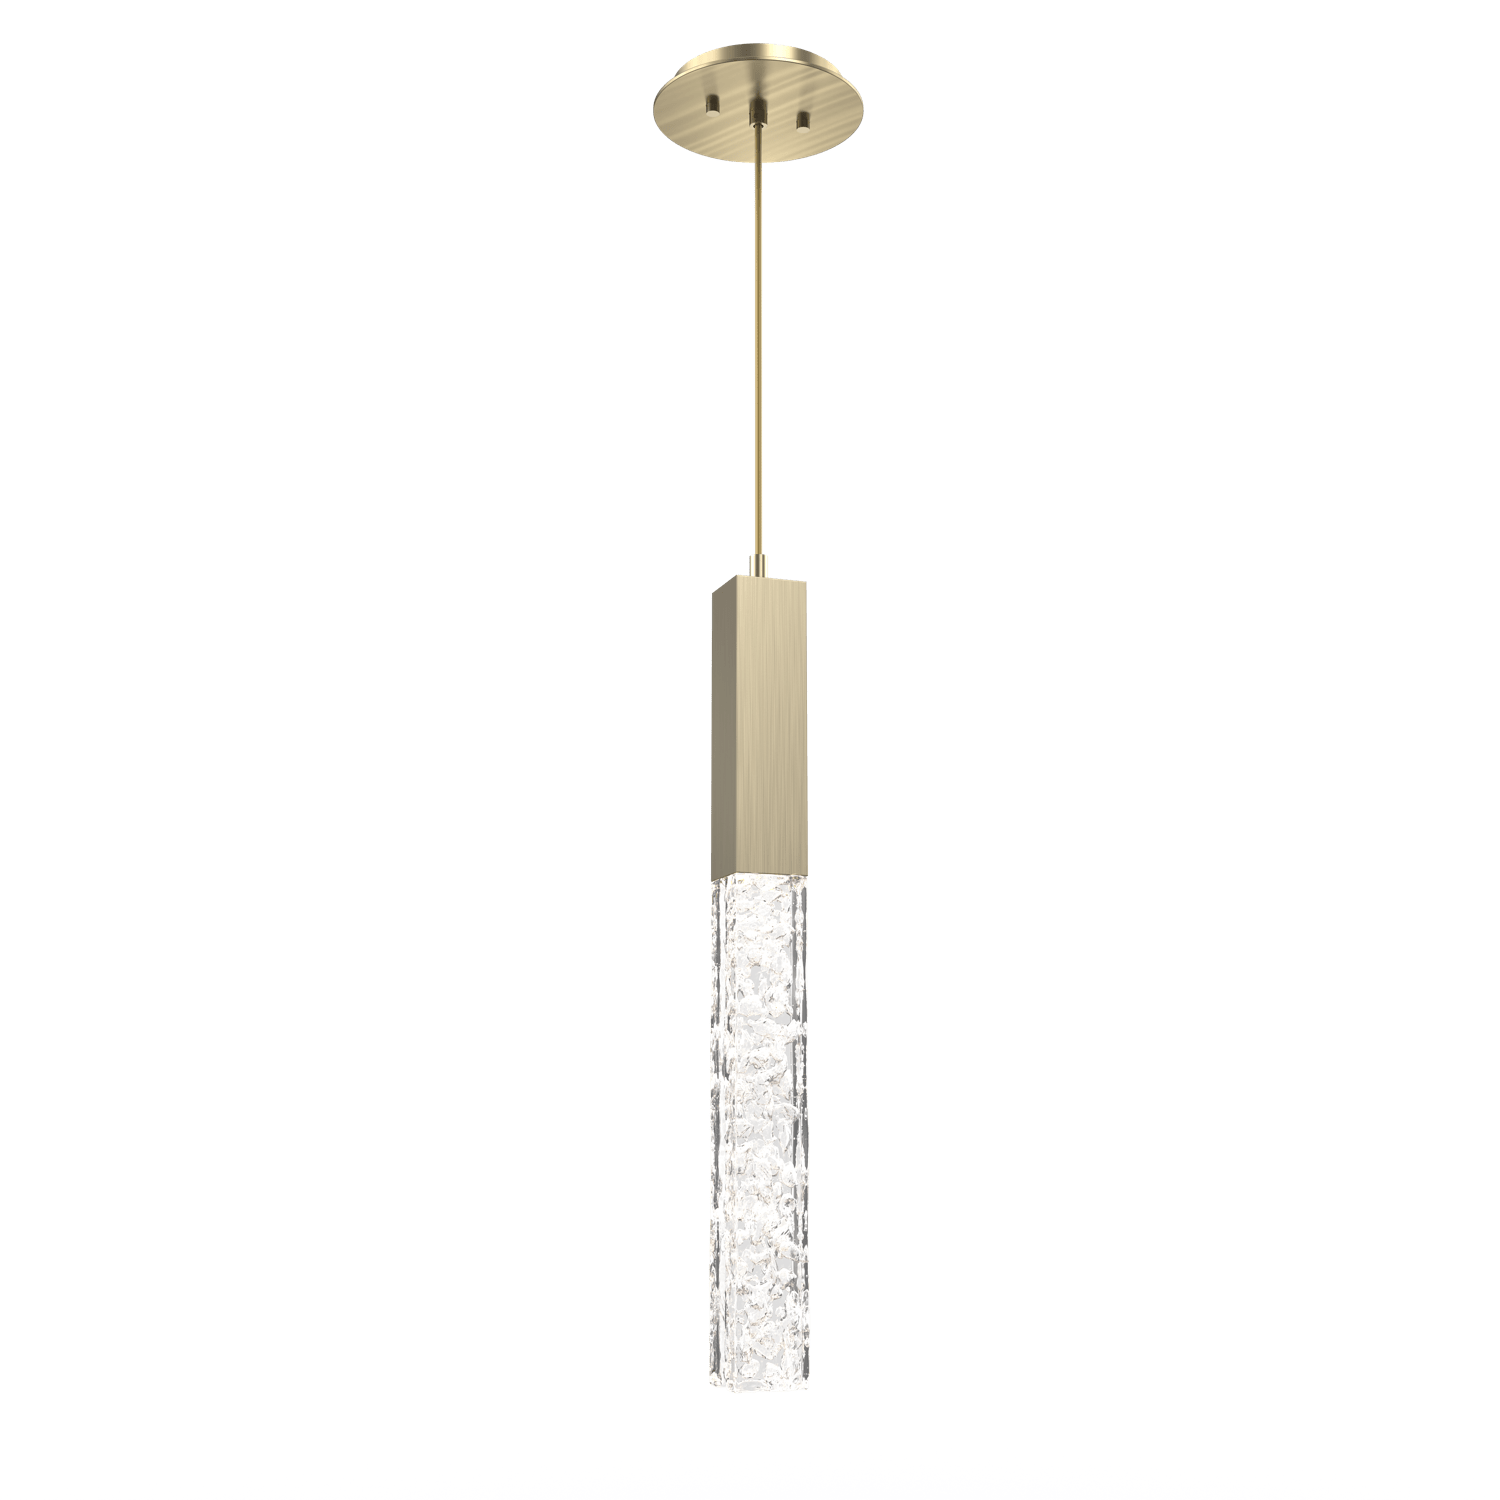 LAB0060-01-HB-GC-Hammerton-Studio-Axis-Pendant-Light-with-Heritage-Brass-finish-and-clear-cast-glass-and-LED-lamping